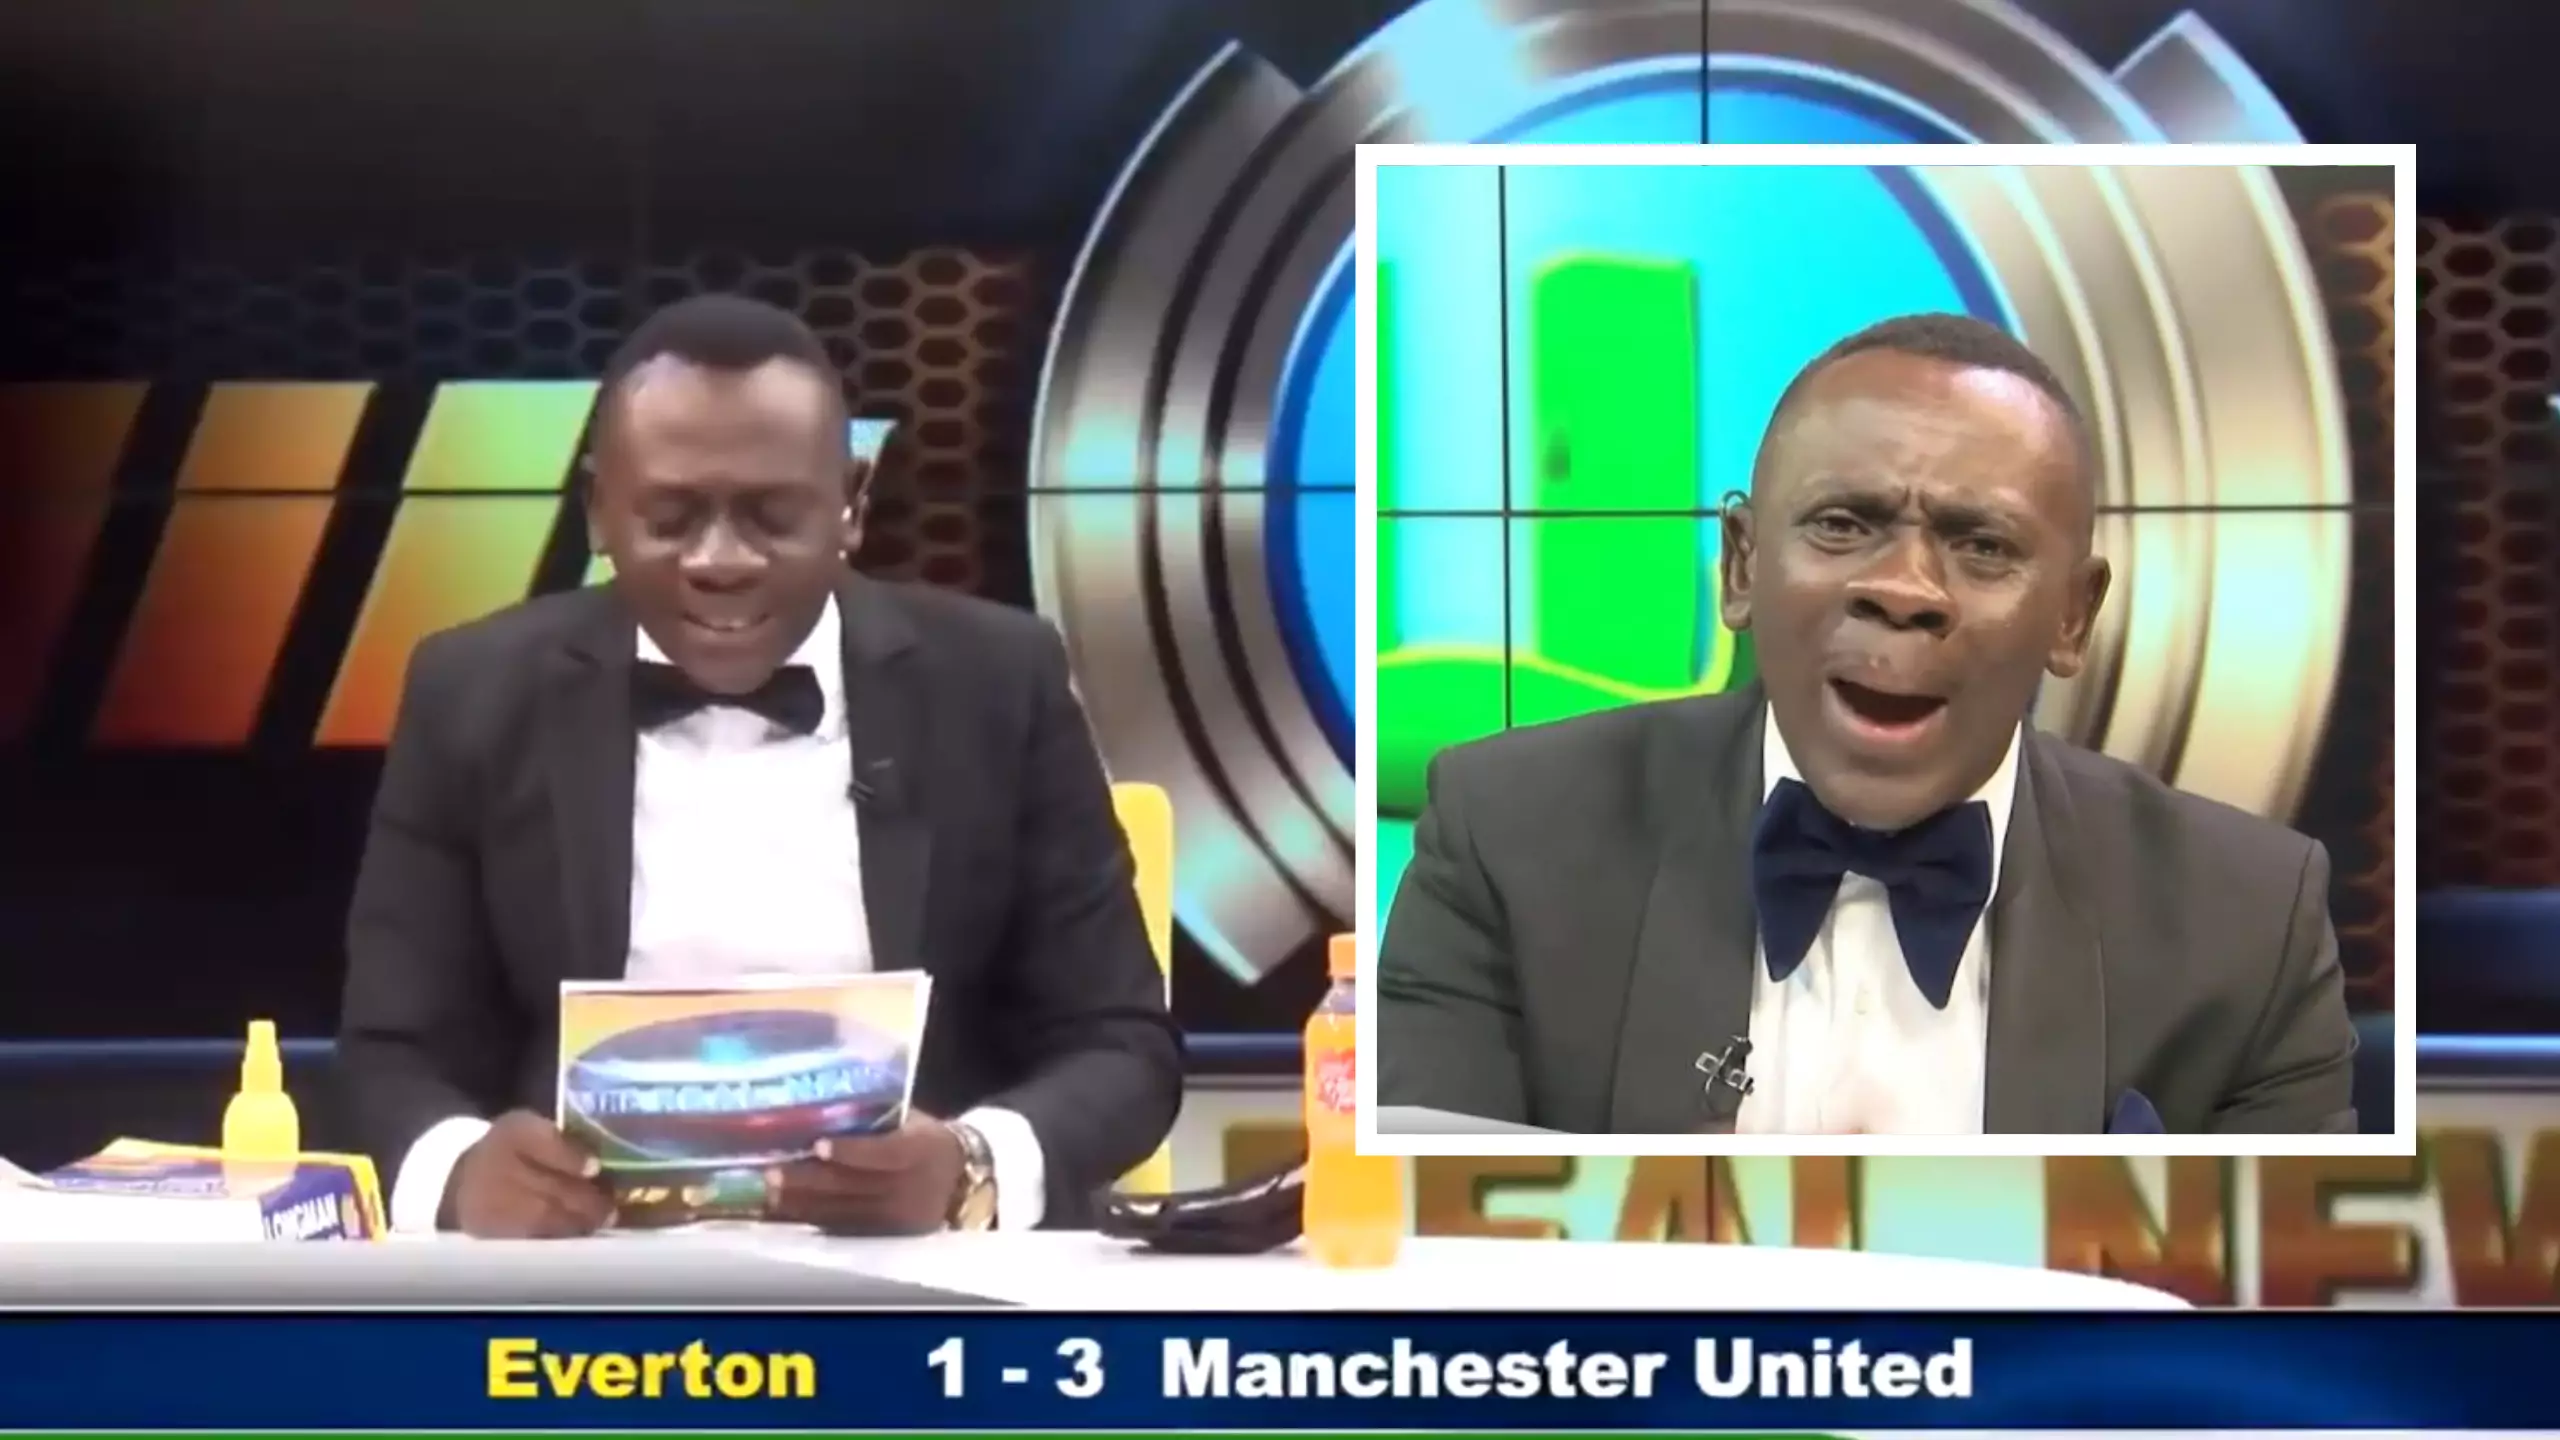 Football Fans Are Loving This Ghanaian 'Pundit' Bringing Joy With His Score Announcements